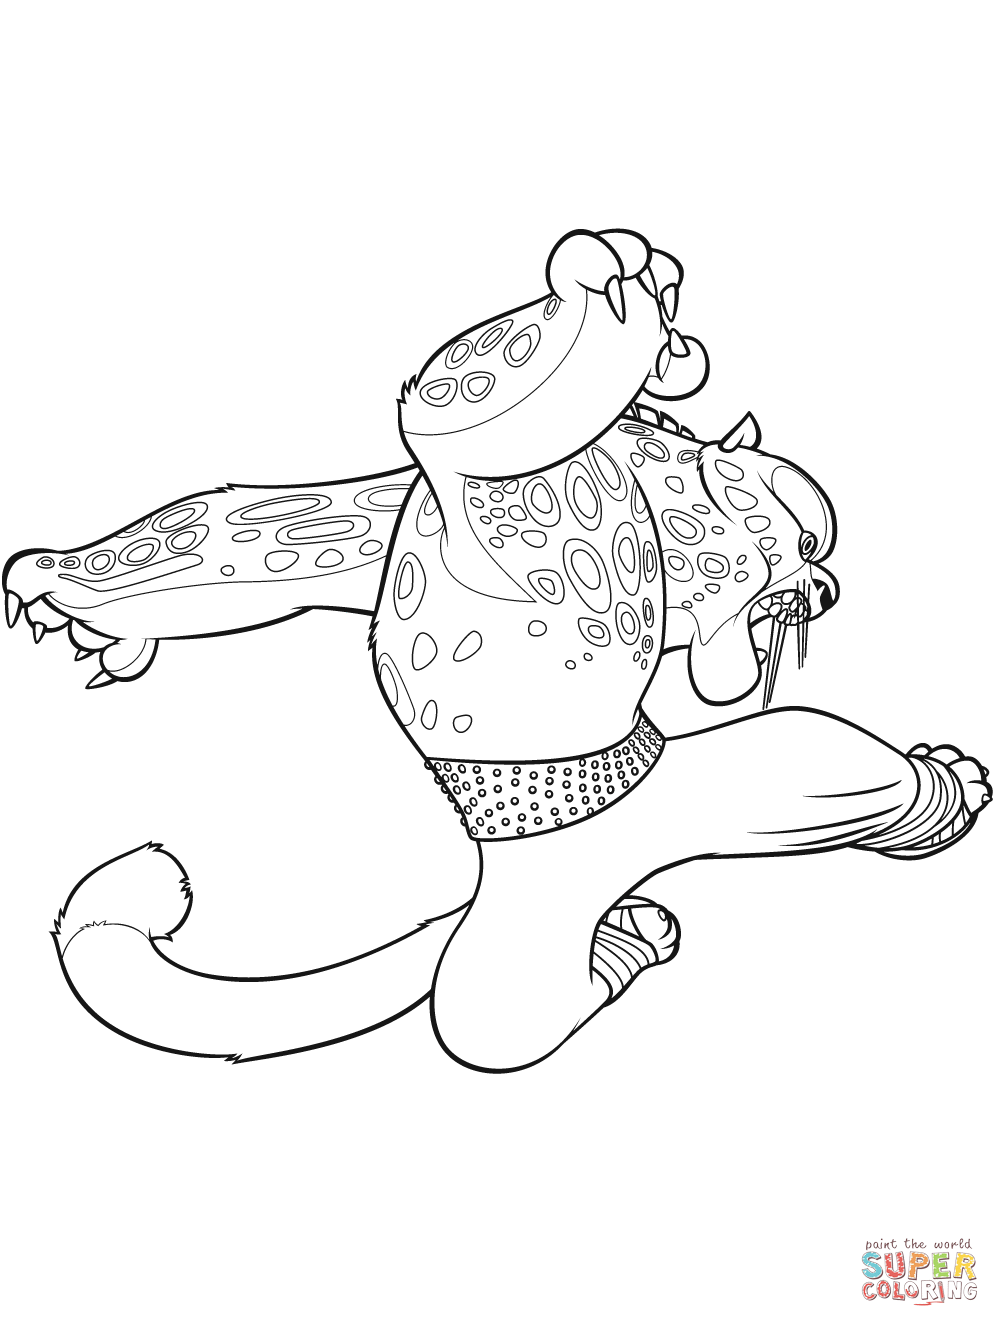 Tai Lung coloring page | Free Printable Coloring Pages